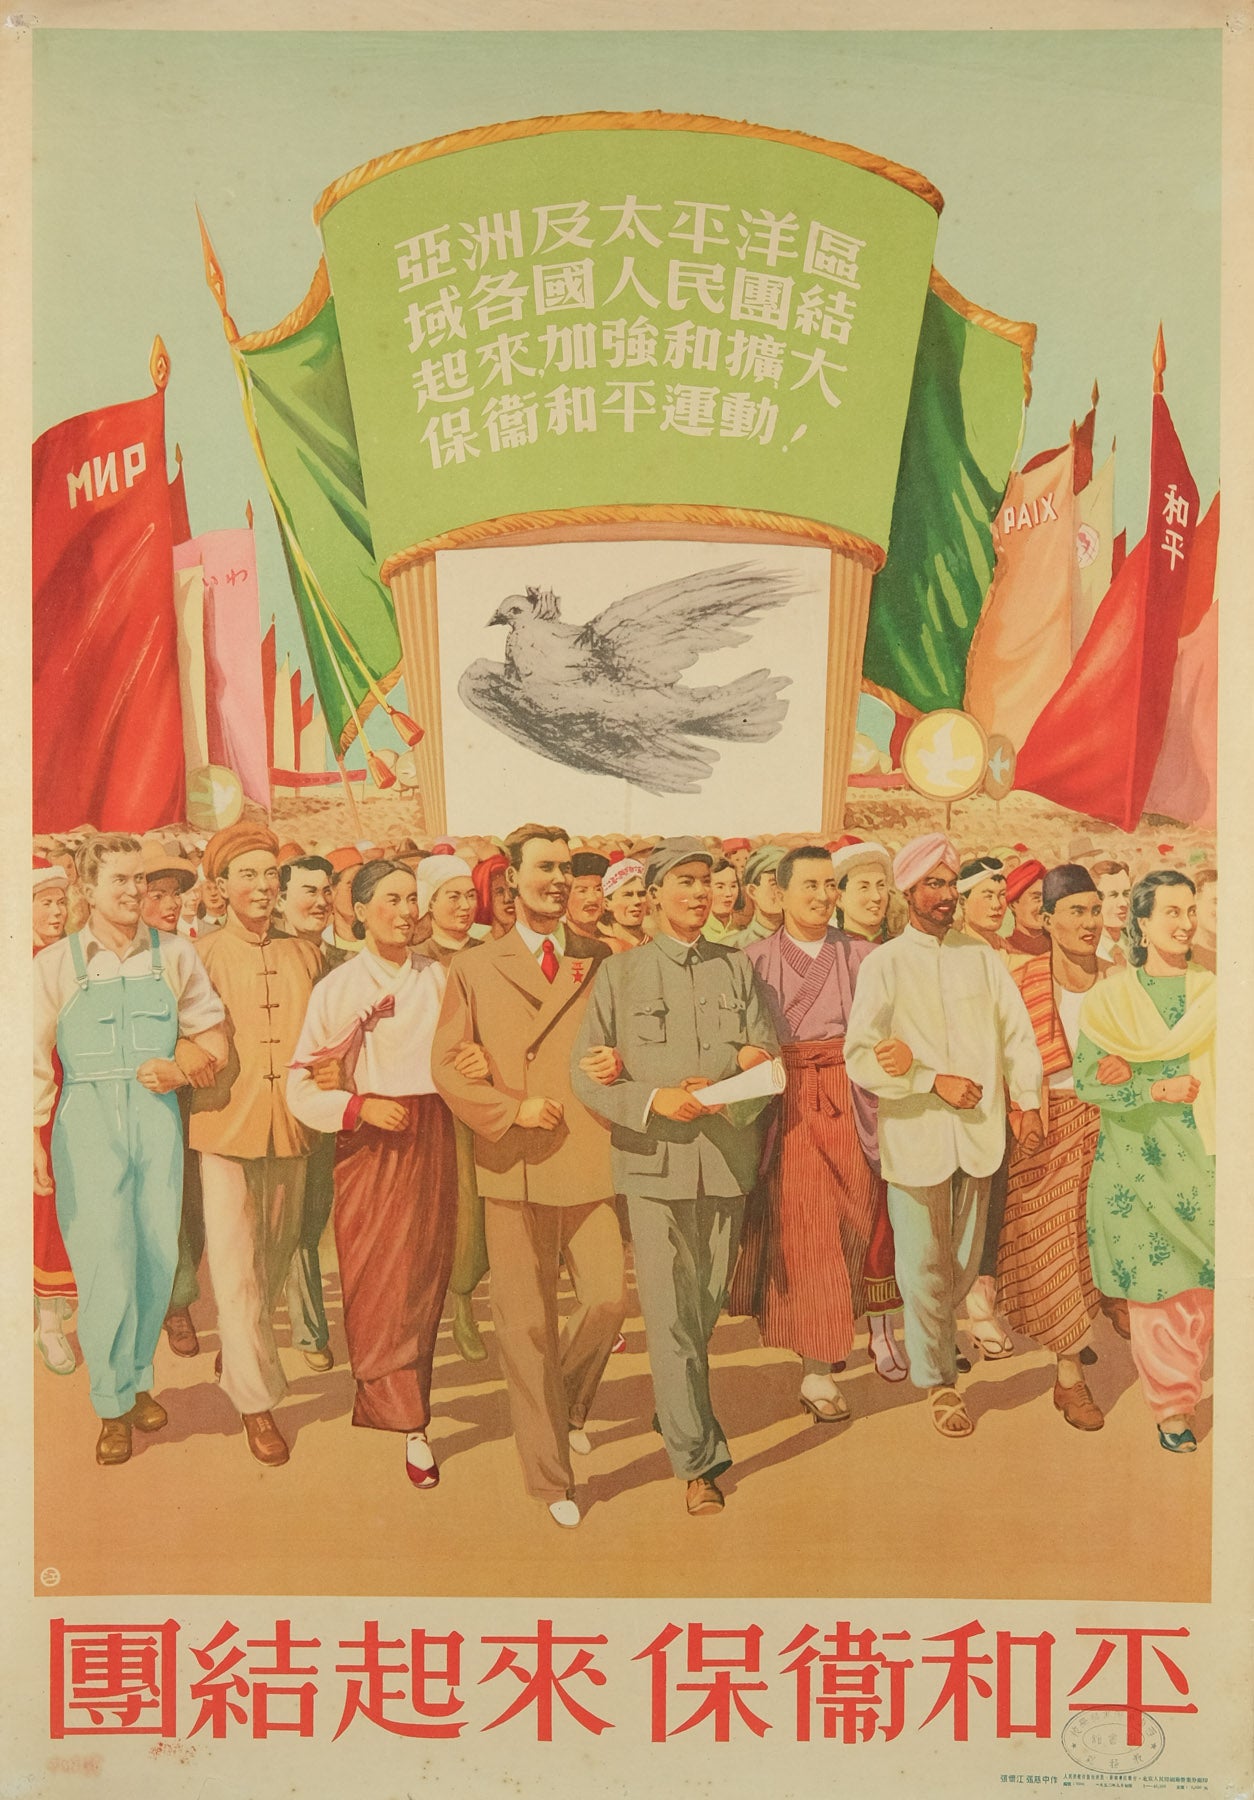 image of the original vintage 1952 Chinese communist propaganda poster by Zhang Huaijiang and Zhang Cizhong titled Join together to safeguard peace published by People's Fine Art Publishing House